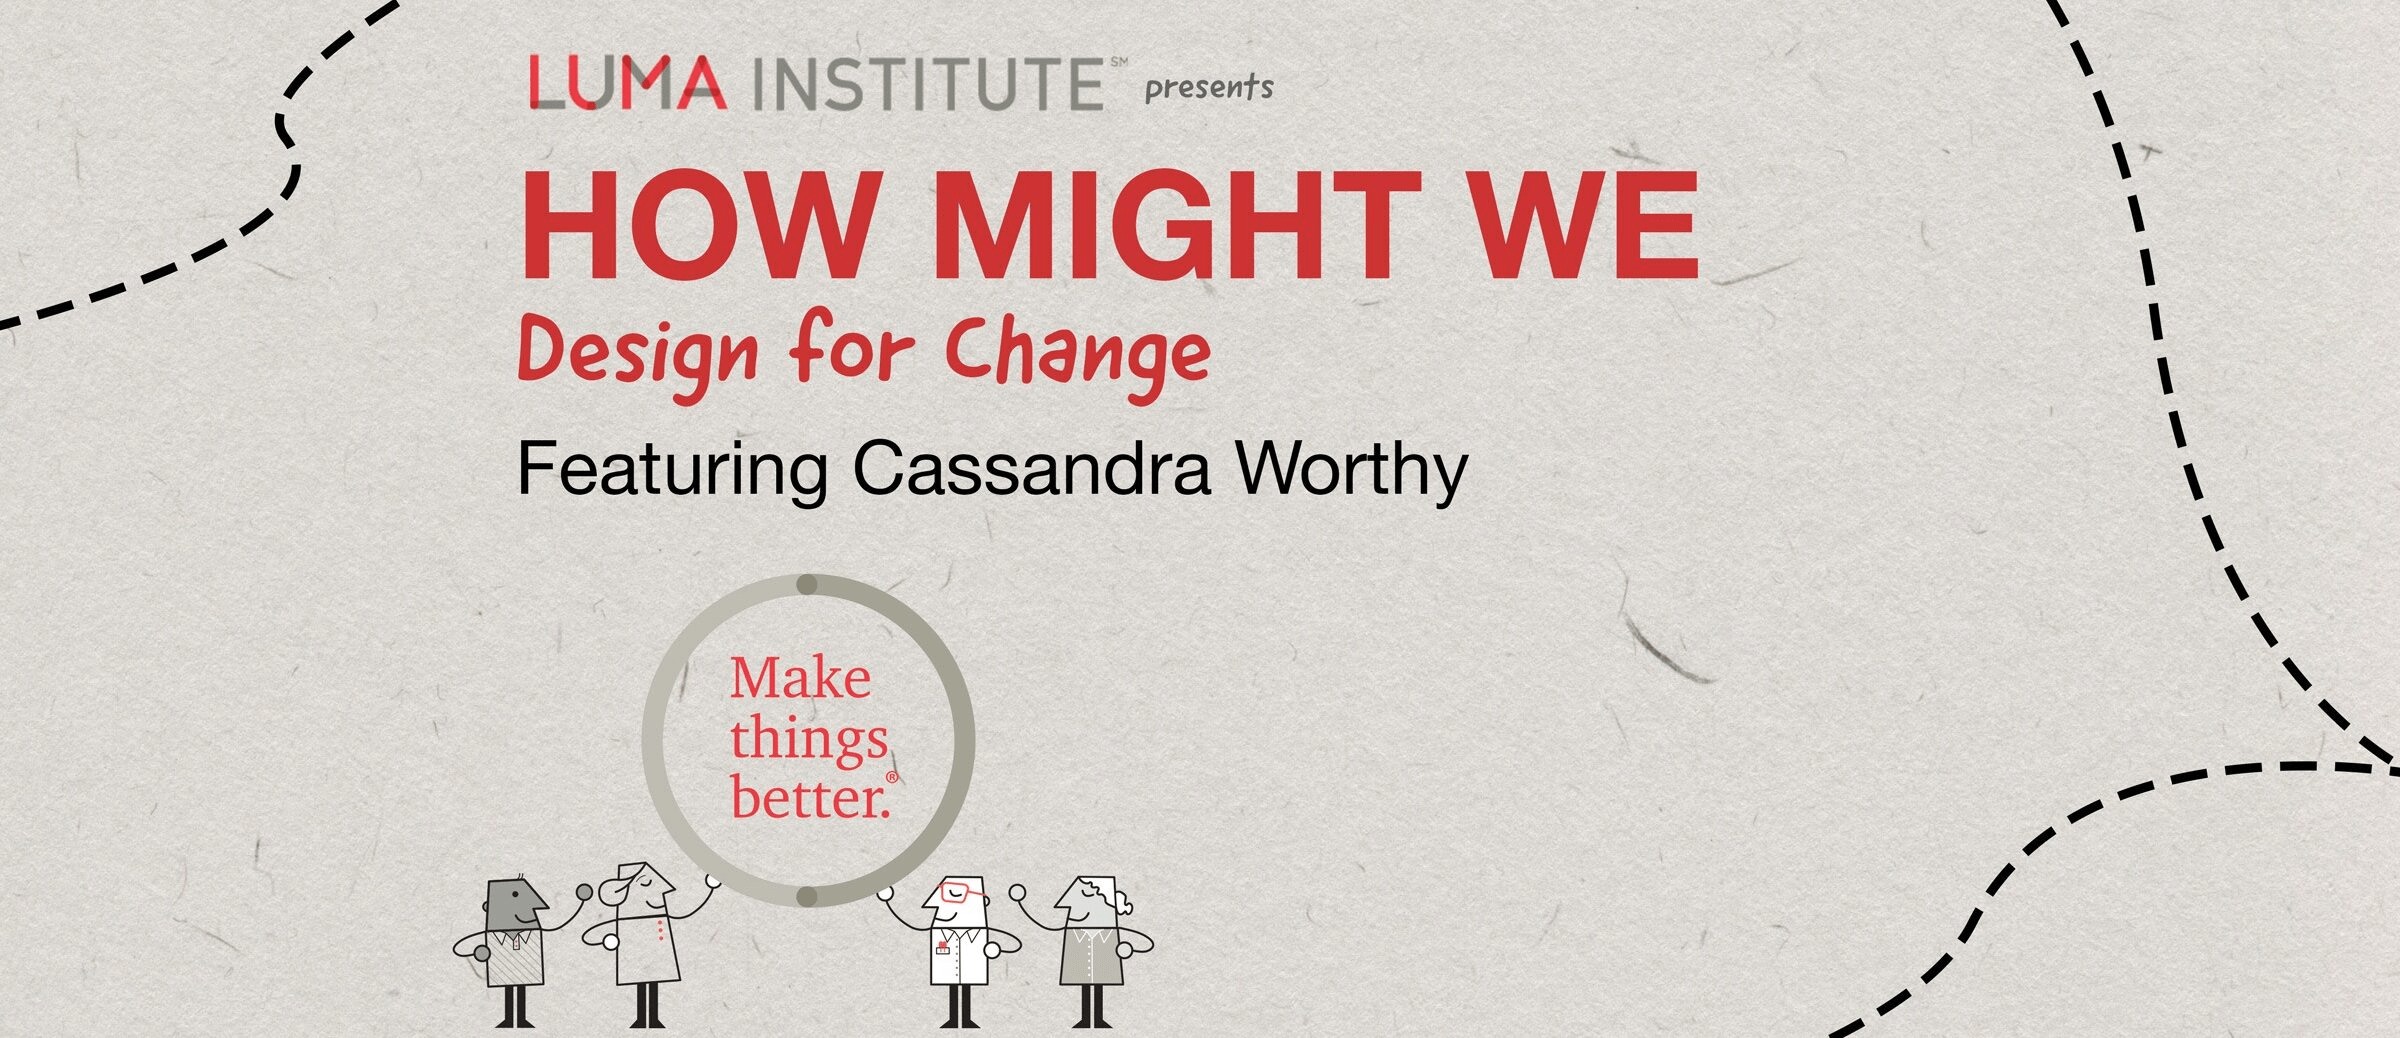 A graphic displaying the words LUMA Institute presents How Might We Desigh for Change Featuring Cassandra Worthy. Two LUMApics are holding up a circle that says Make thing better.